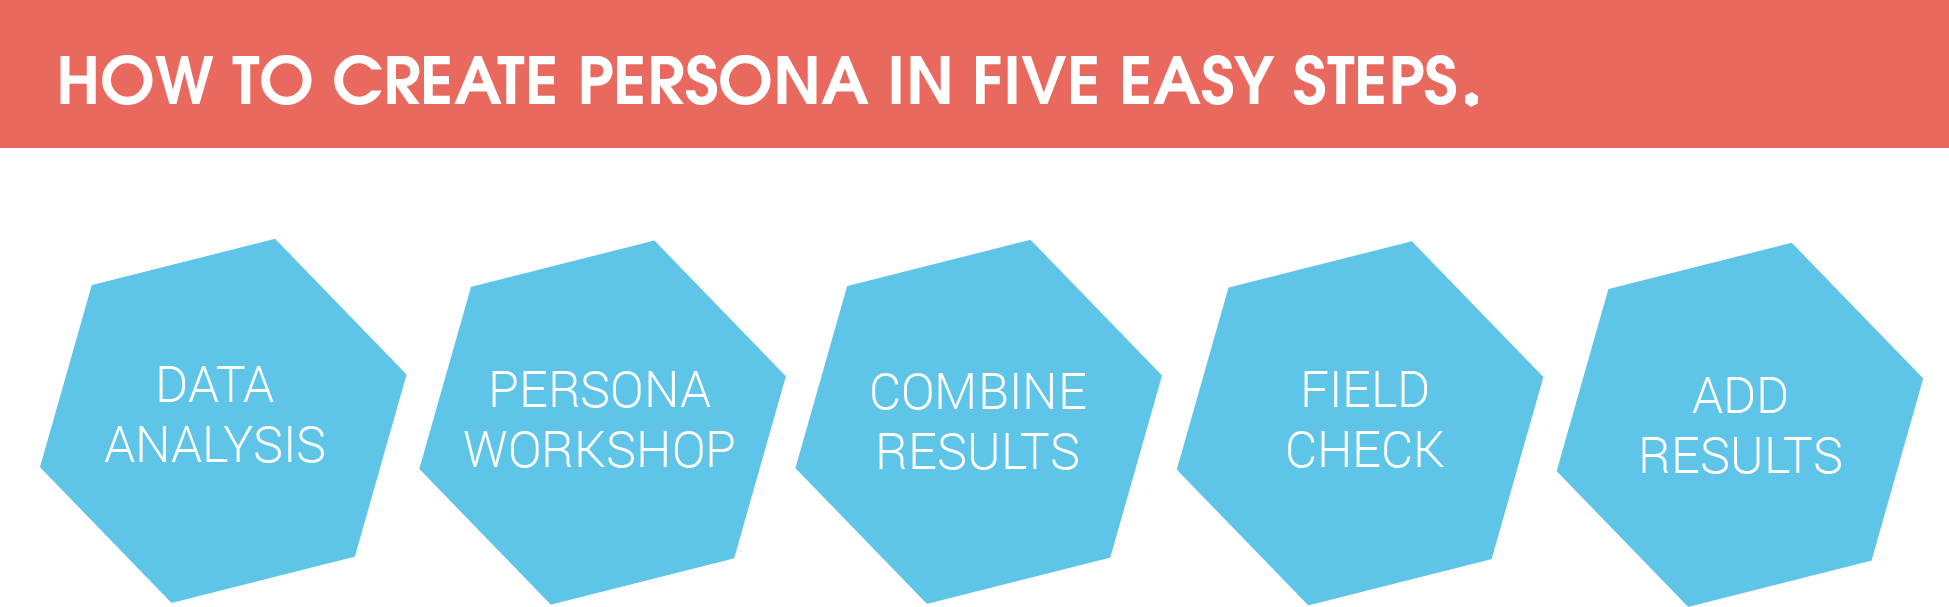 Develop a persona profile in five easy steps: 
1. data analysis 
2. persona workshop 
3. combine results 
4. field check 
5. add results